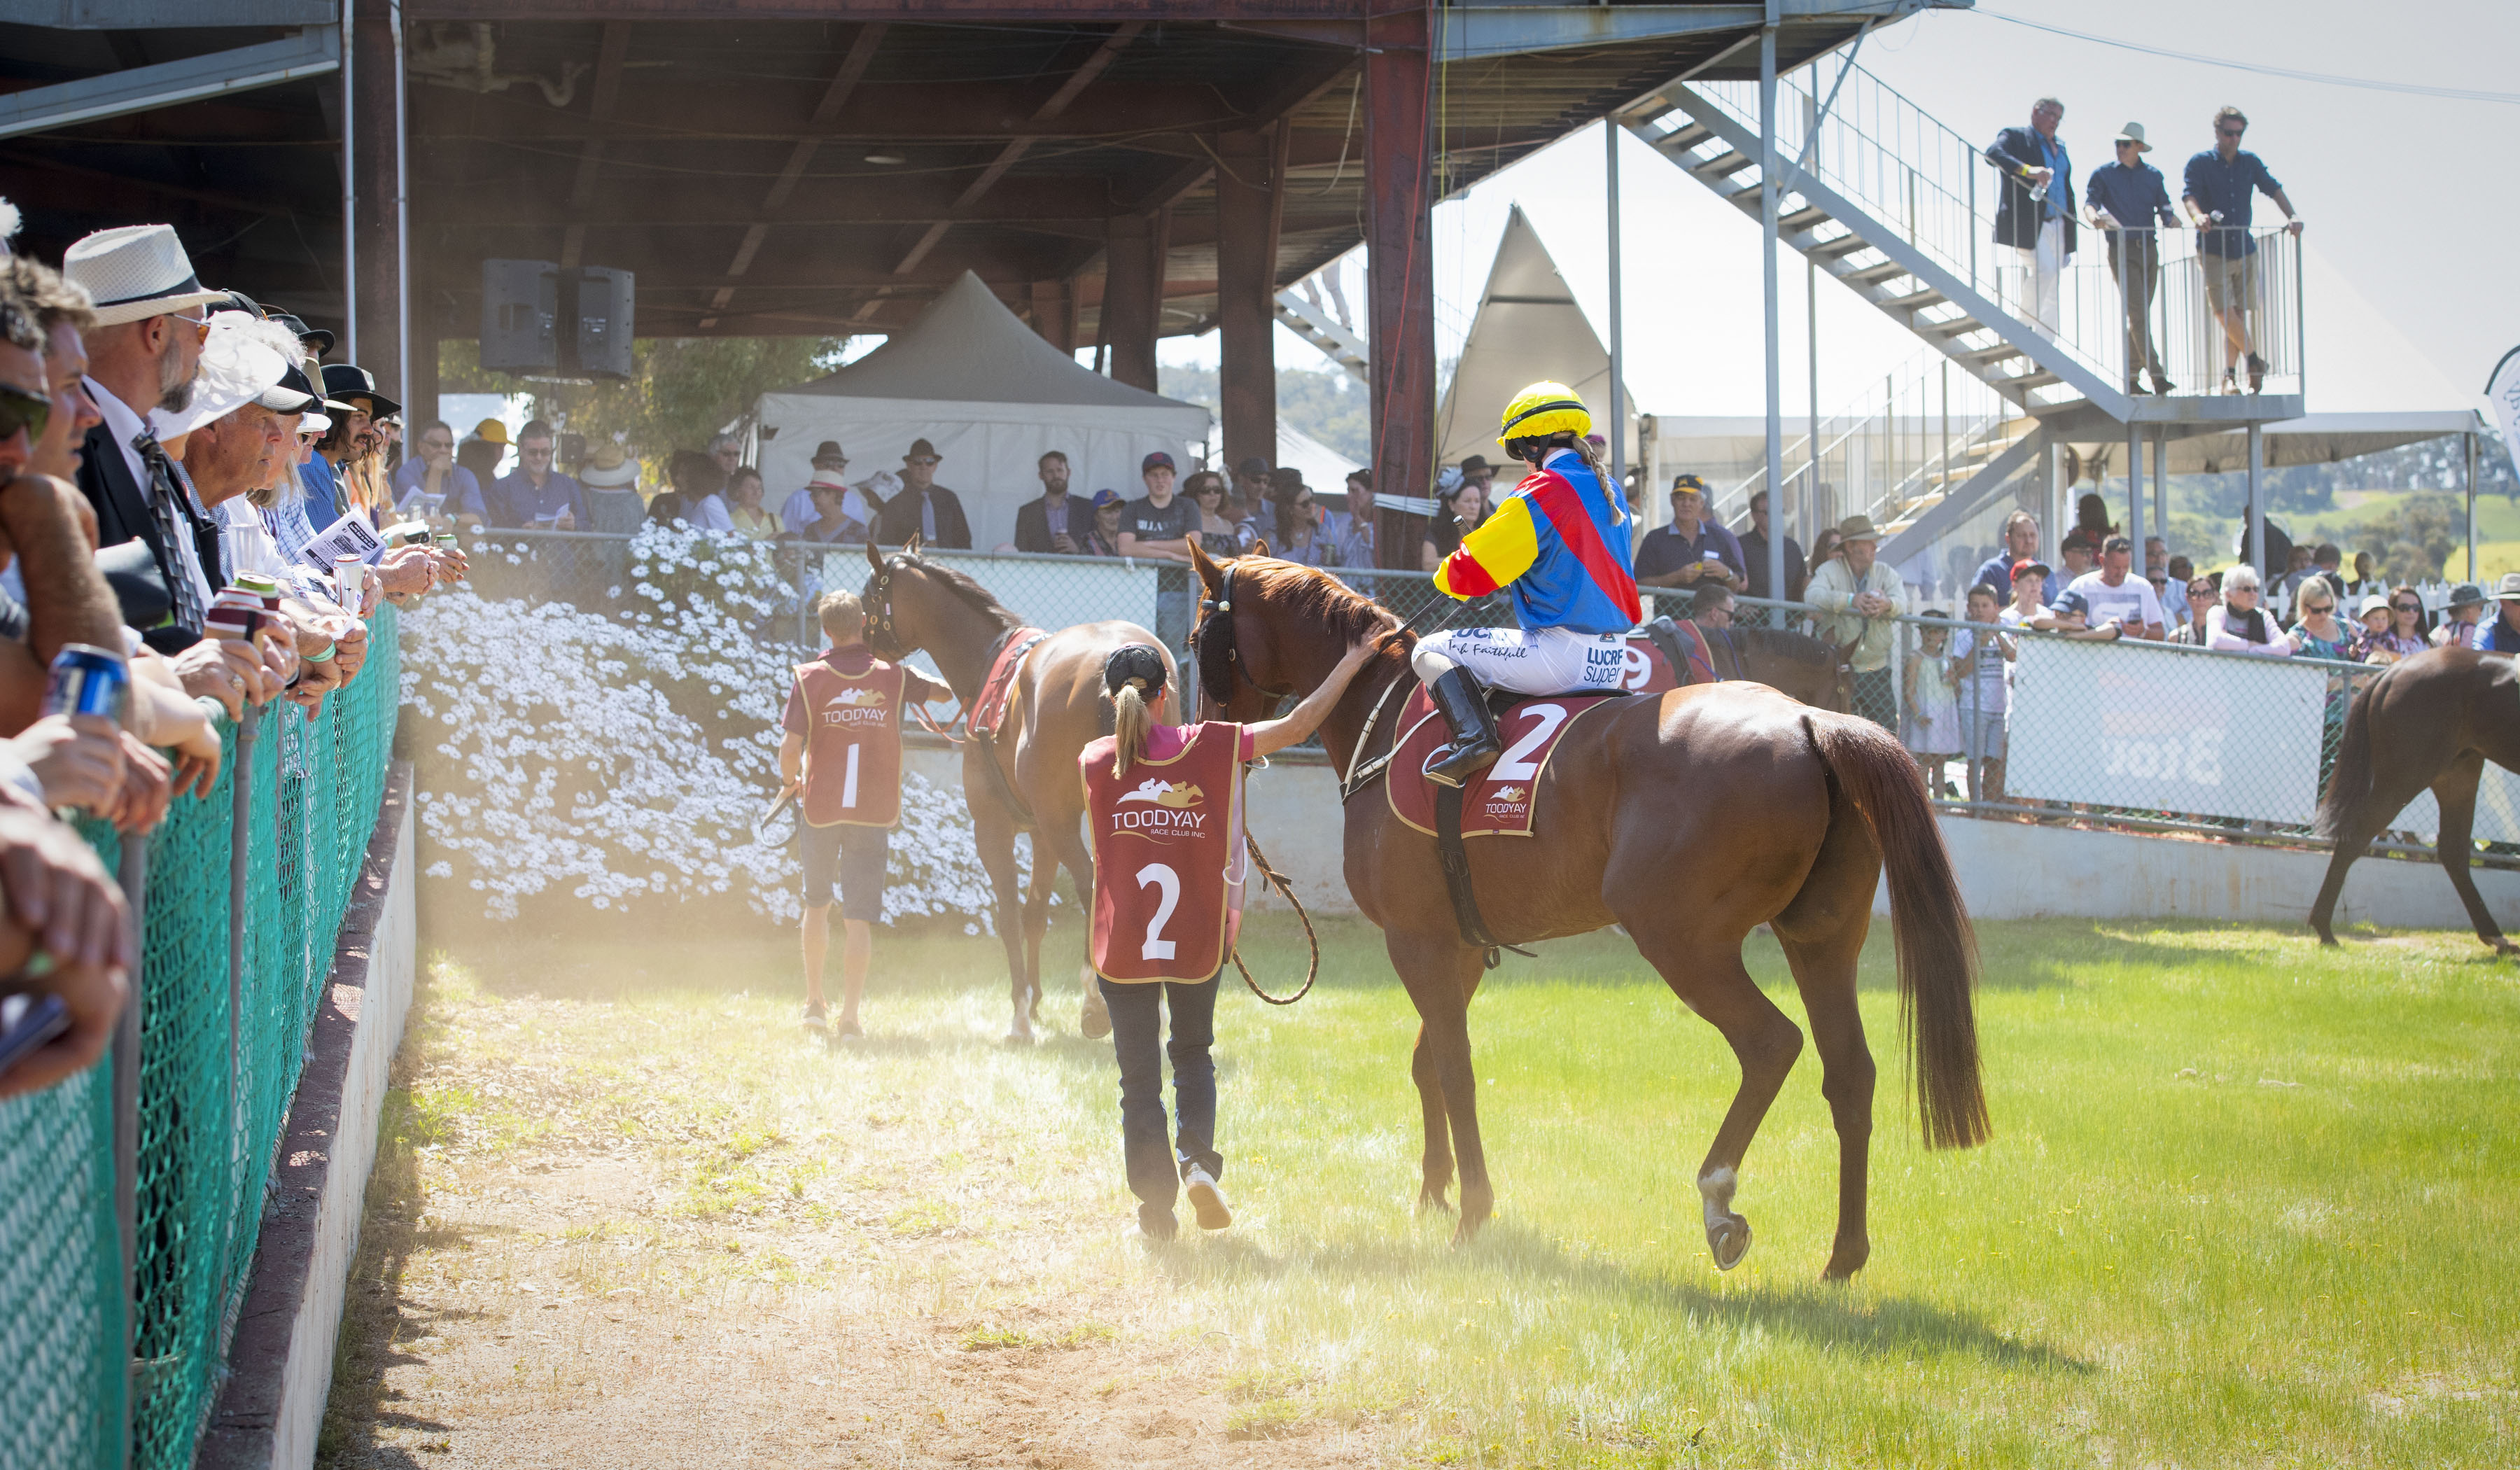 About the Toodyay Race Club